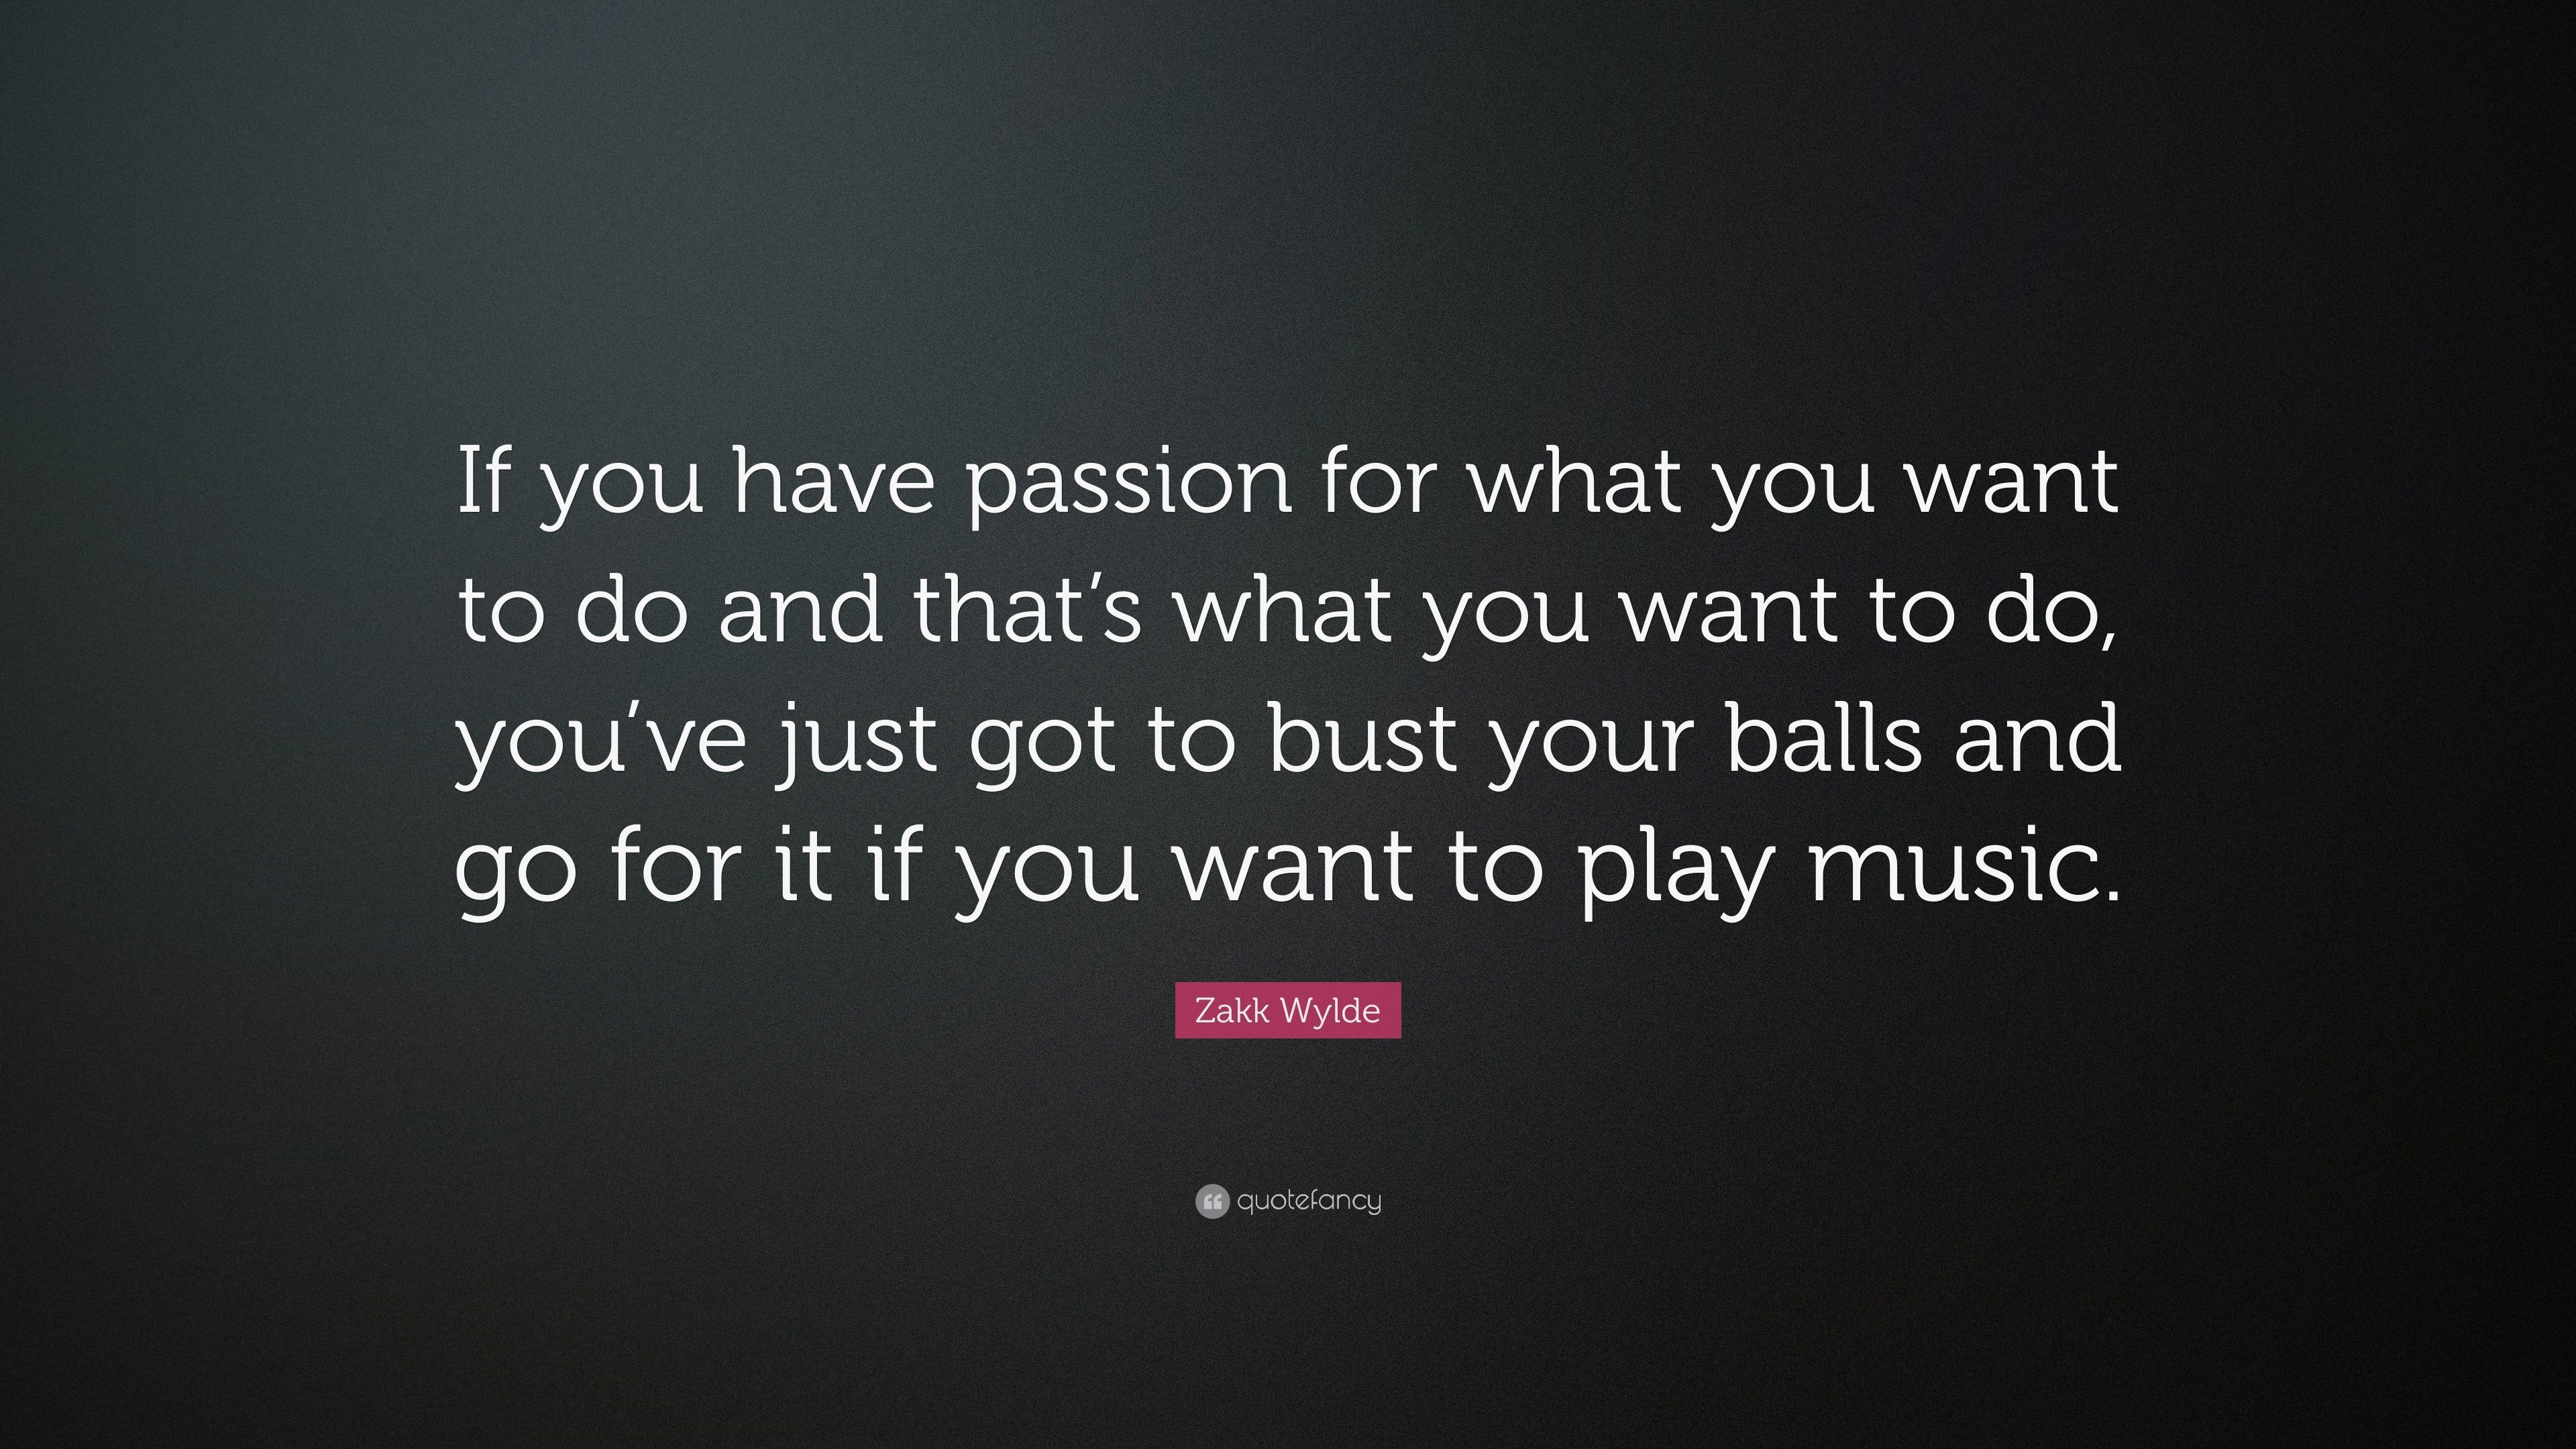 3840x2160 Zakk Wylde Quote: “If you have passion for what you want to do and